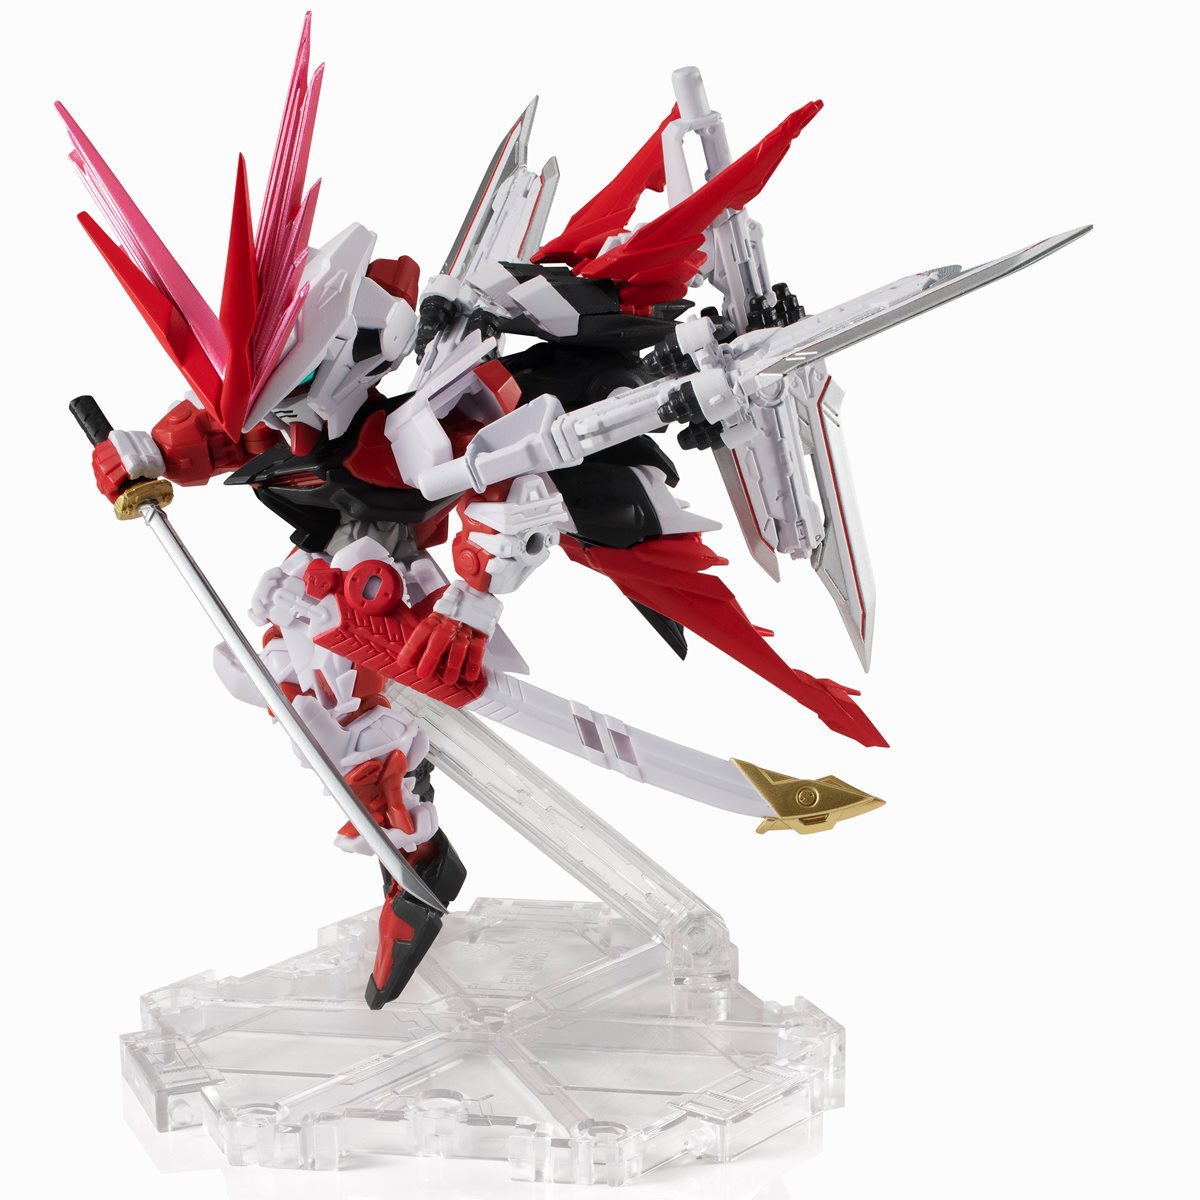 Mobile Suit Gundam Seed Destiny Astray R Gundam Astray Red Dragon Nxedge Style Action Figure